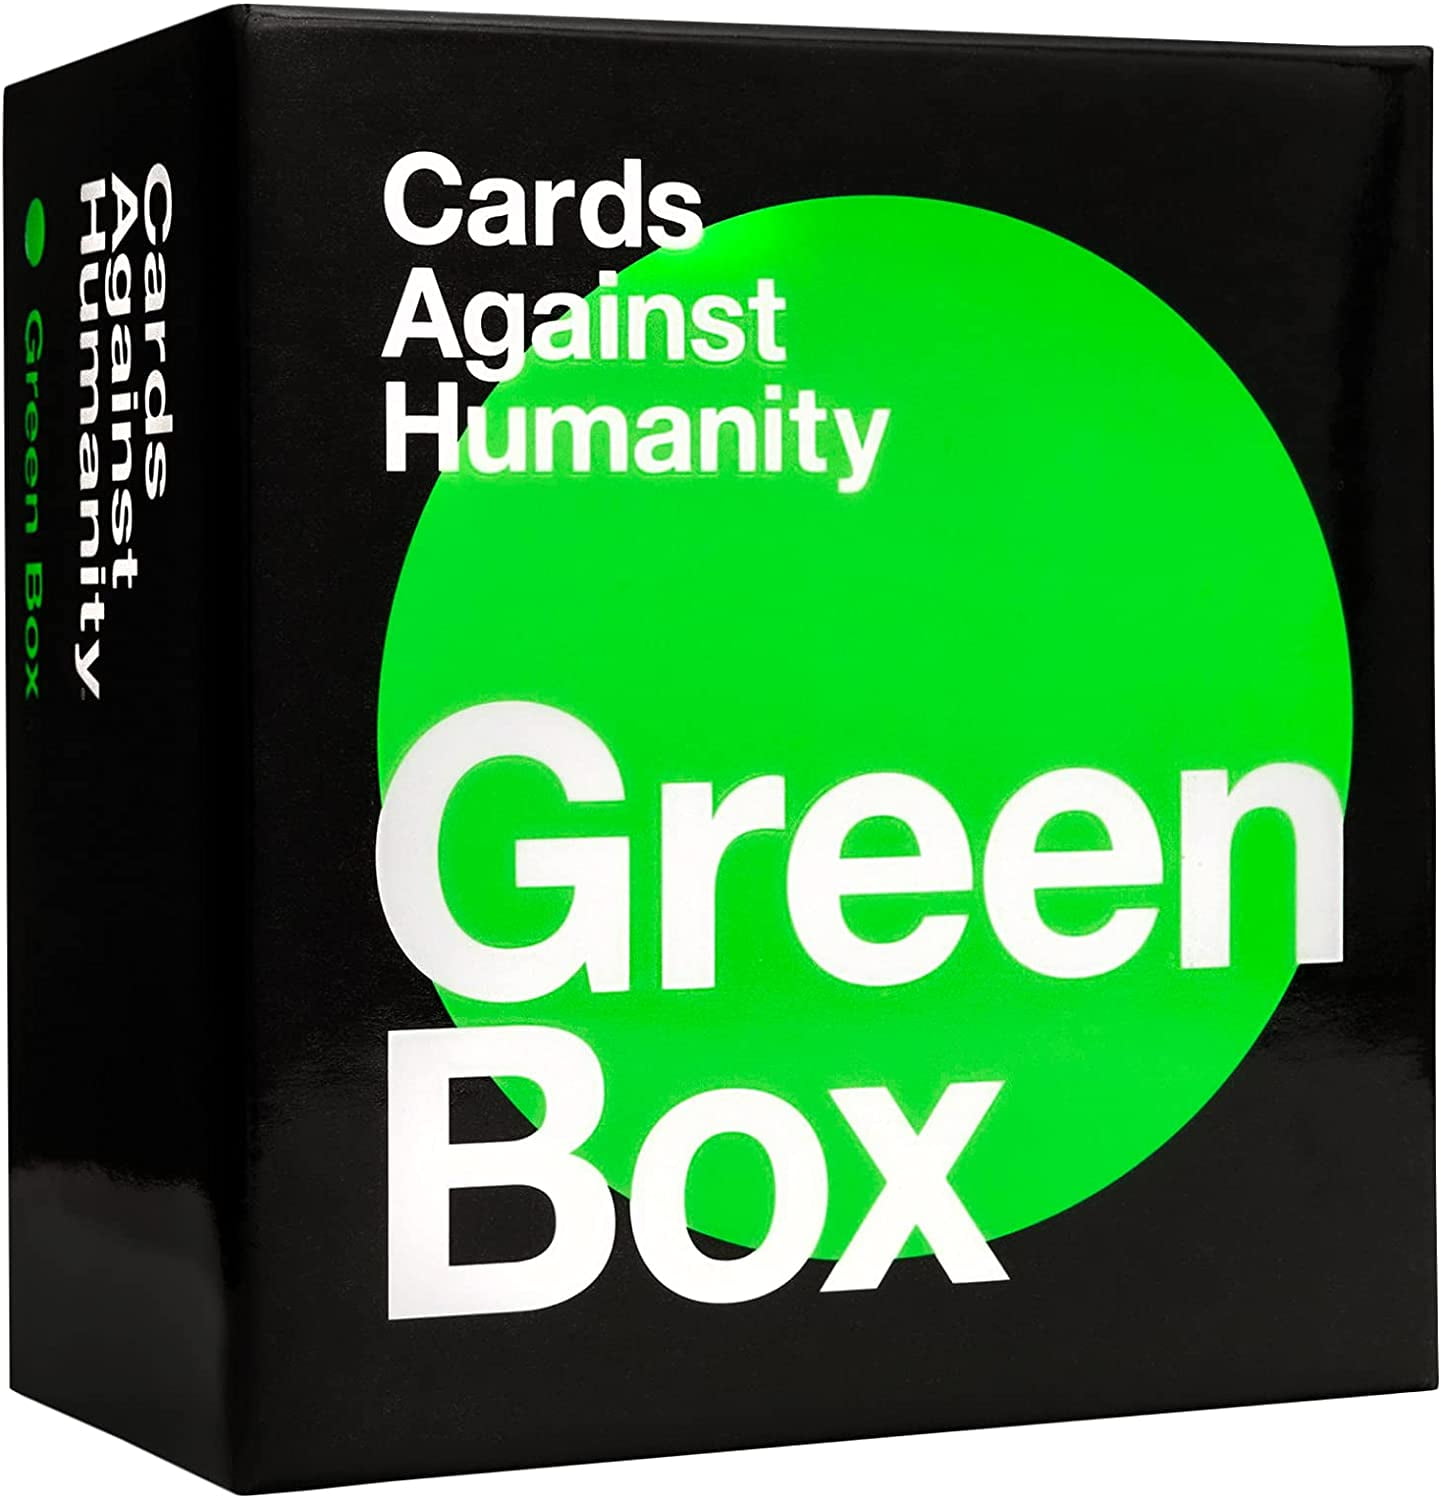 Cards Against Humanity Absurd Box Expansion Set 300 Cards 